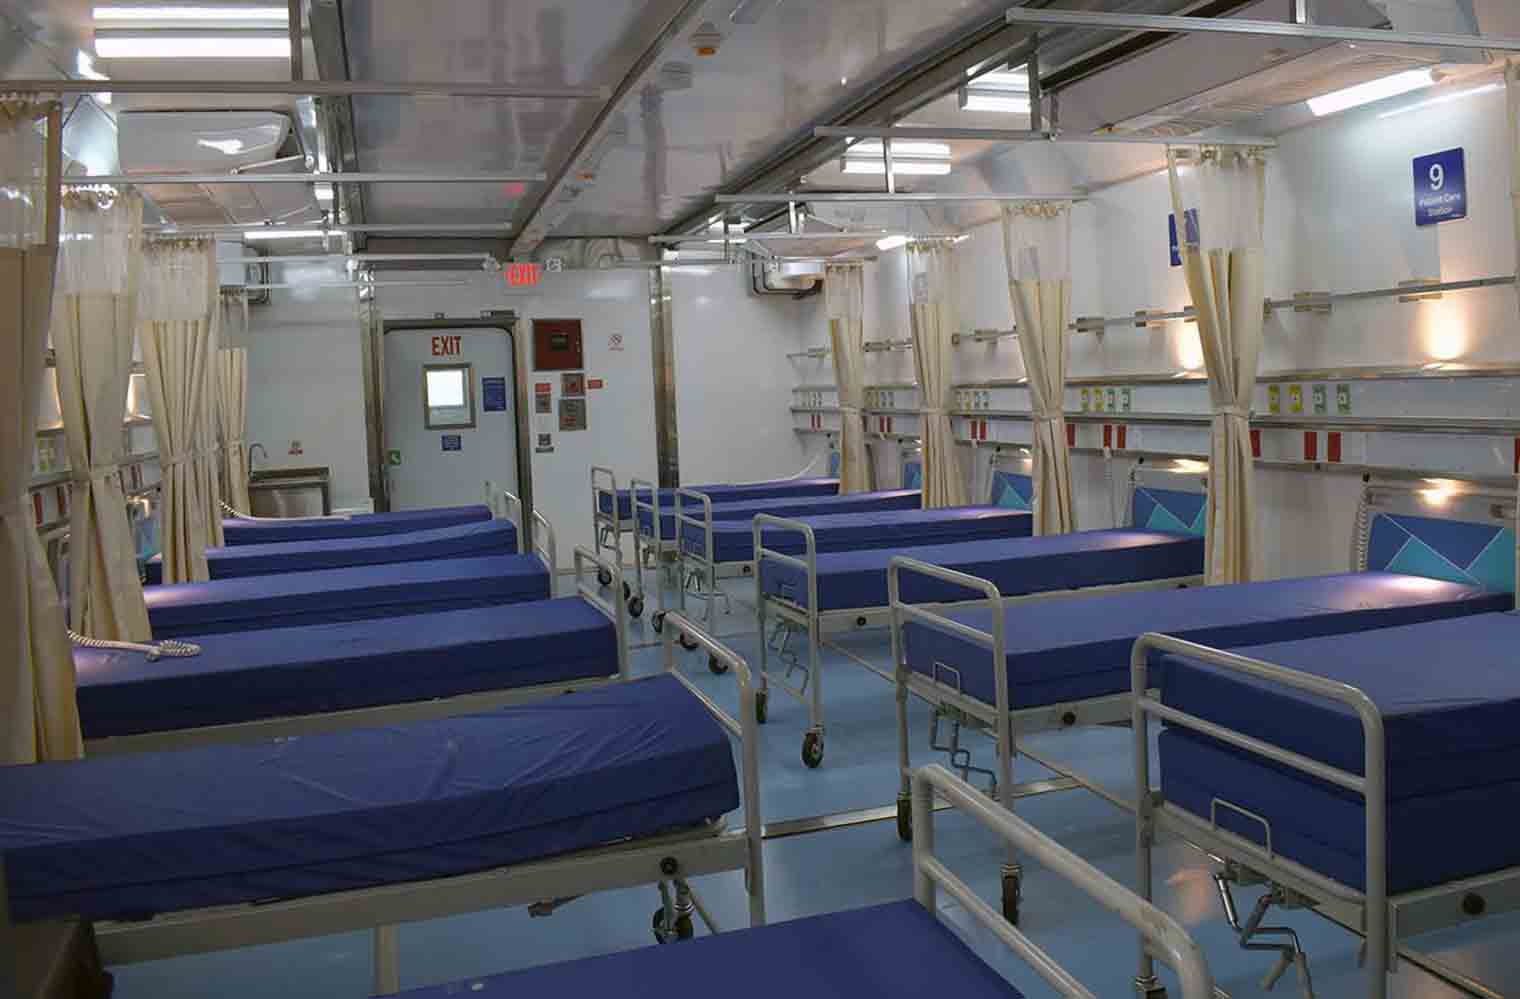 Interior of mobile ICU at Winter Haven Hospital